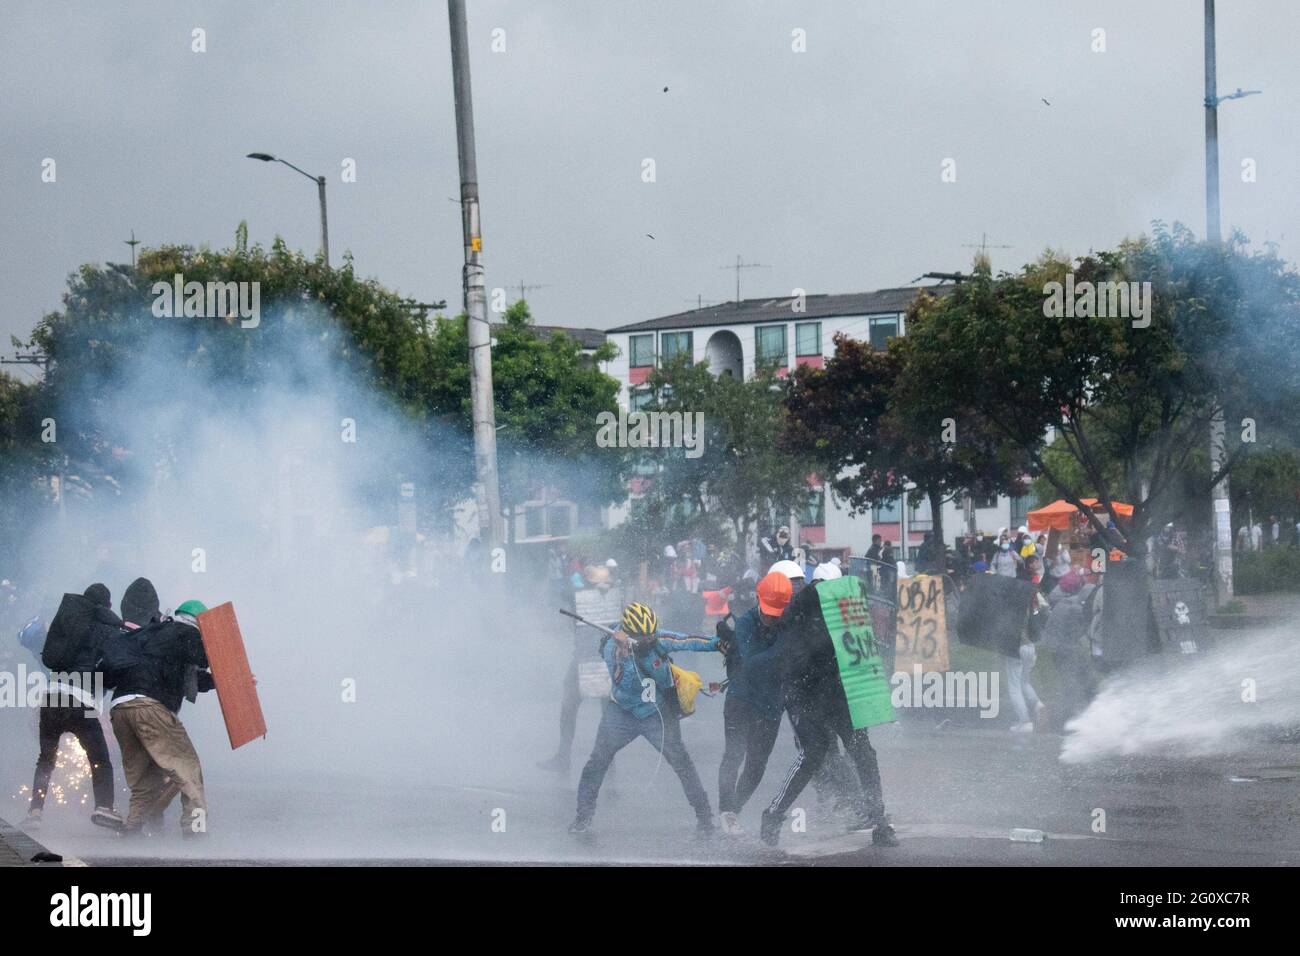 Bogota, Cundinamarca, Colombia. 2nd June, 2021. Demonstrators from the front line cover themselves from water cannons from Colombia's riot police (ESMAD) riot tanks as a new day of anti-government protest in BogotÃ¡, Colombia against the government of President IvÃ¡n Duque and police brutality on June 2, 2021 Credit: Daniel Romero/LongVisual/ZUMA Wire/Alamy Live News Stock Photo